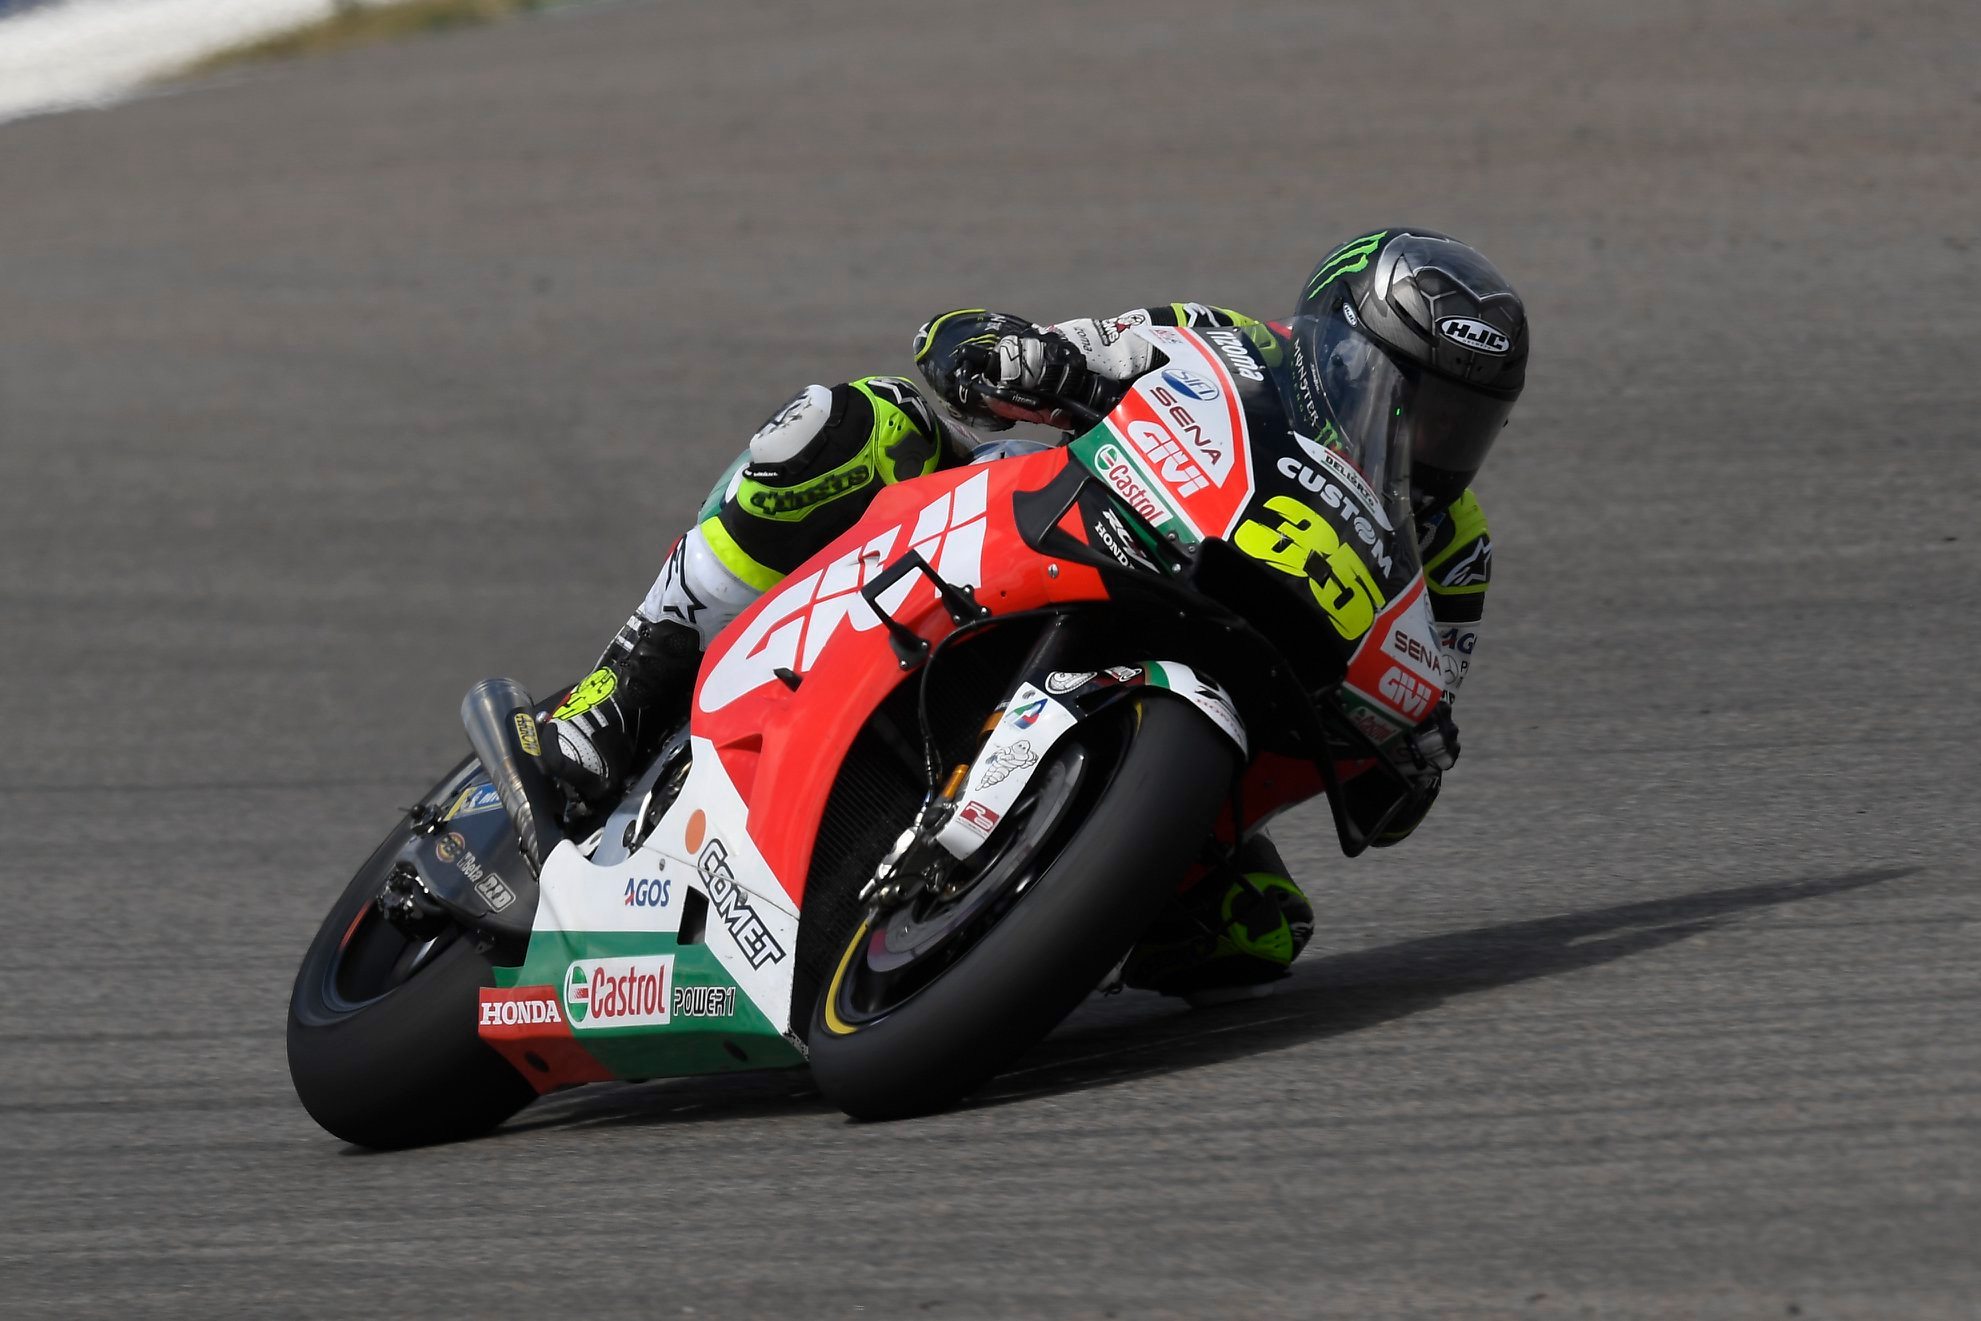 Incredible podium for Crutchlow in Germany